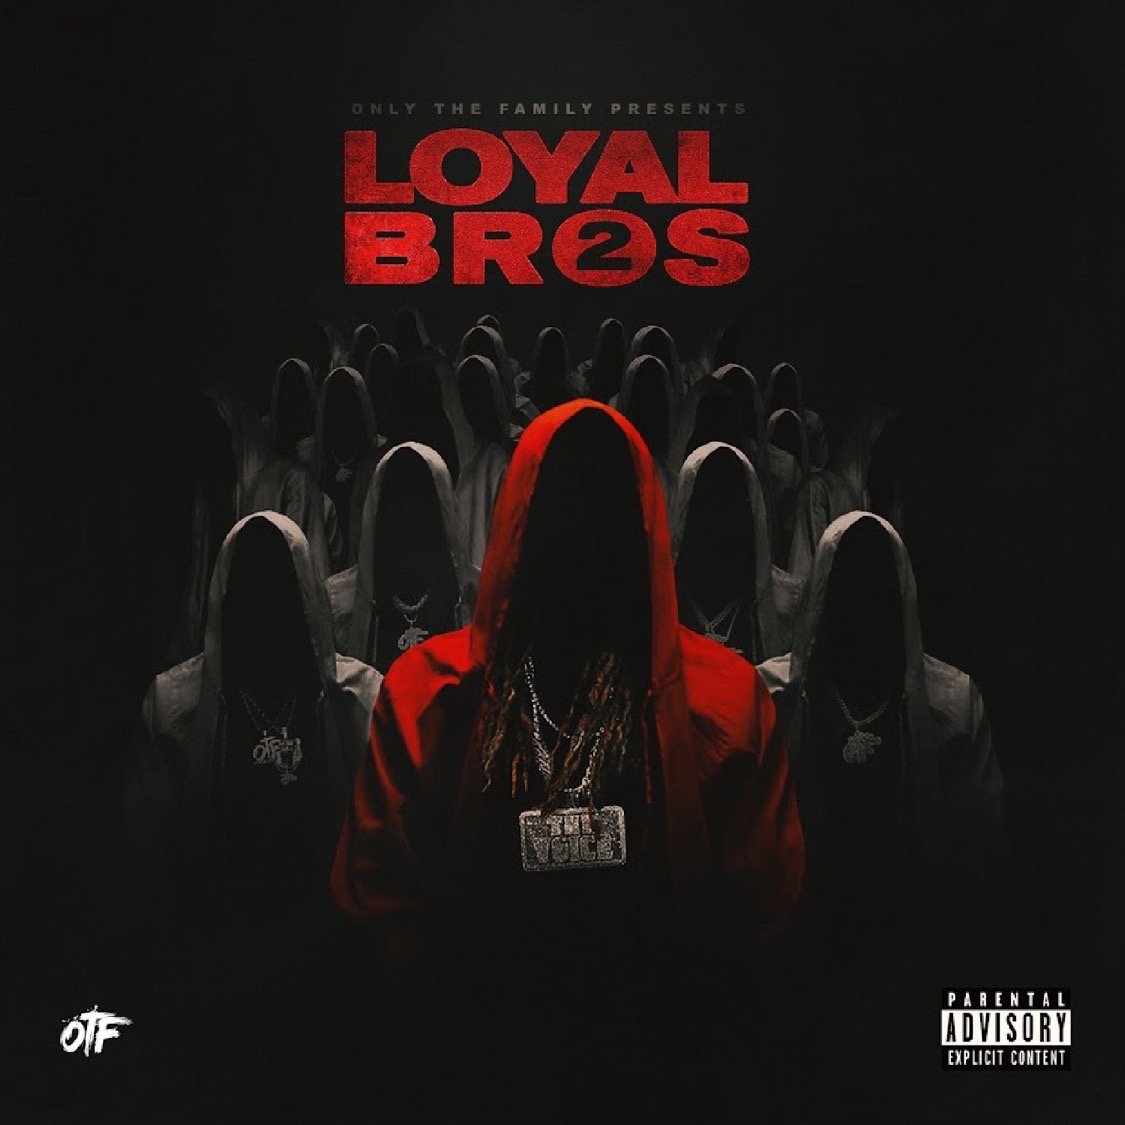 Lil Durk - Only The Family - Lil Durk Presents: Loyal Bros 2 (2022) FLAC Download